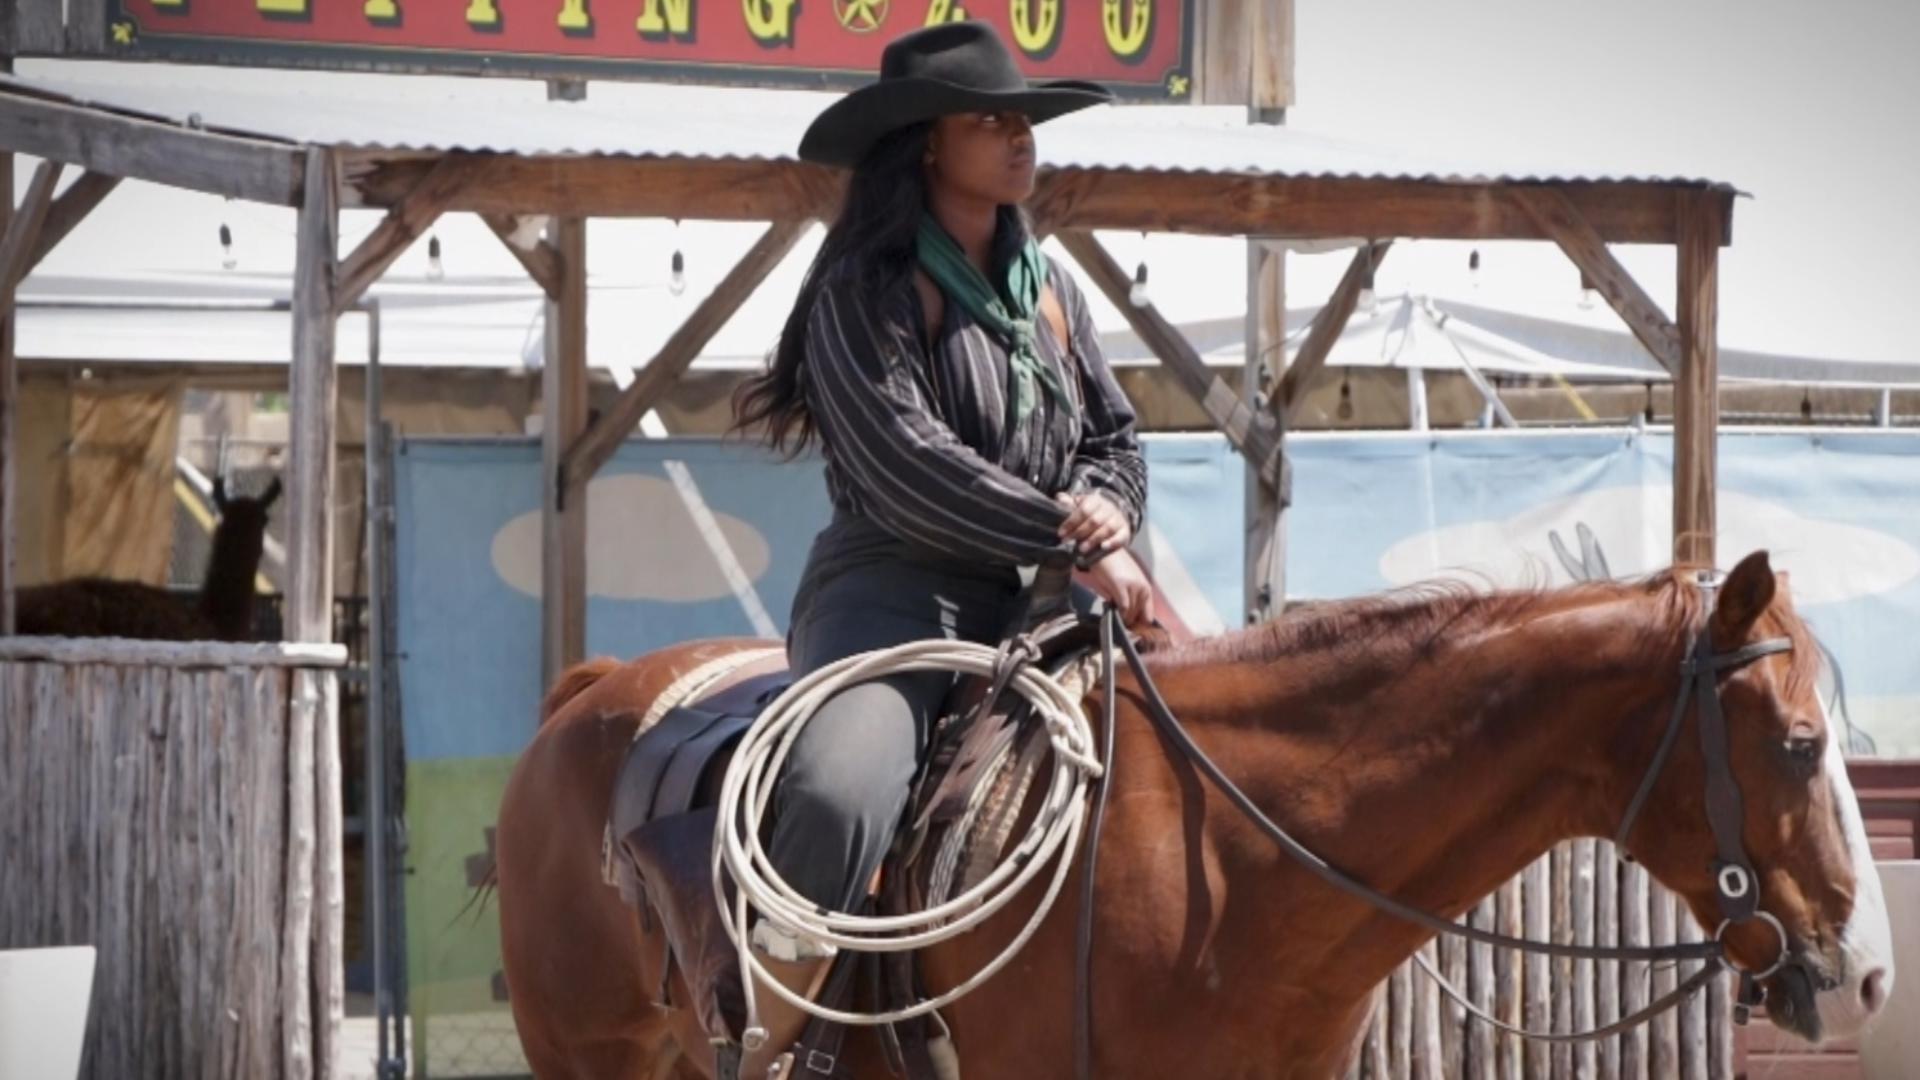 The first Black female drover of the iconic Fort Worth herd speaks with Tashara Parker about her journey.